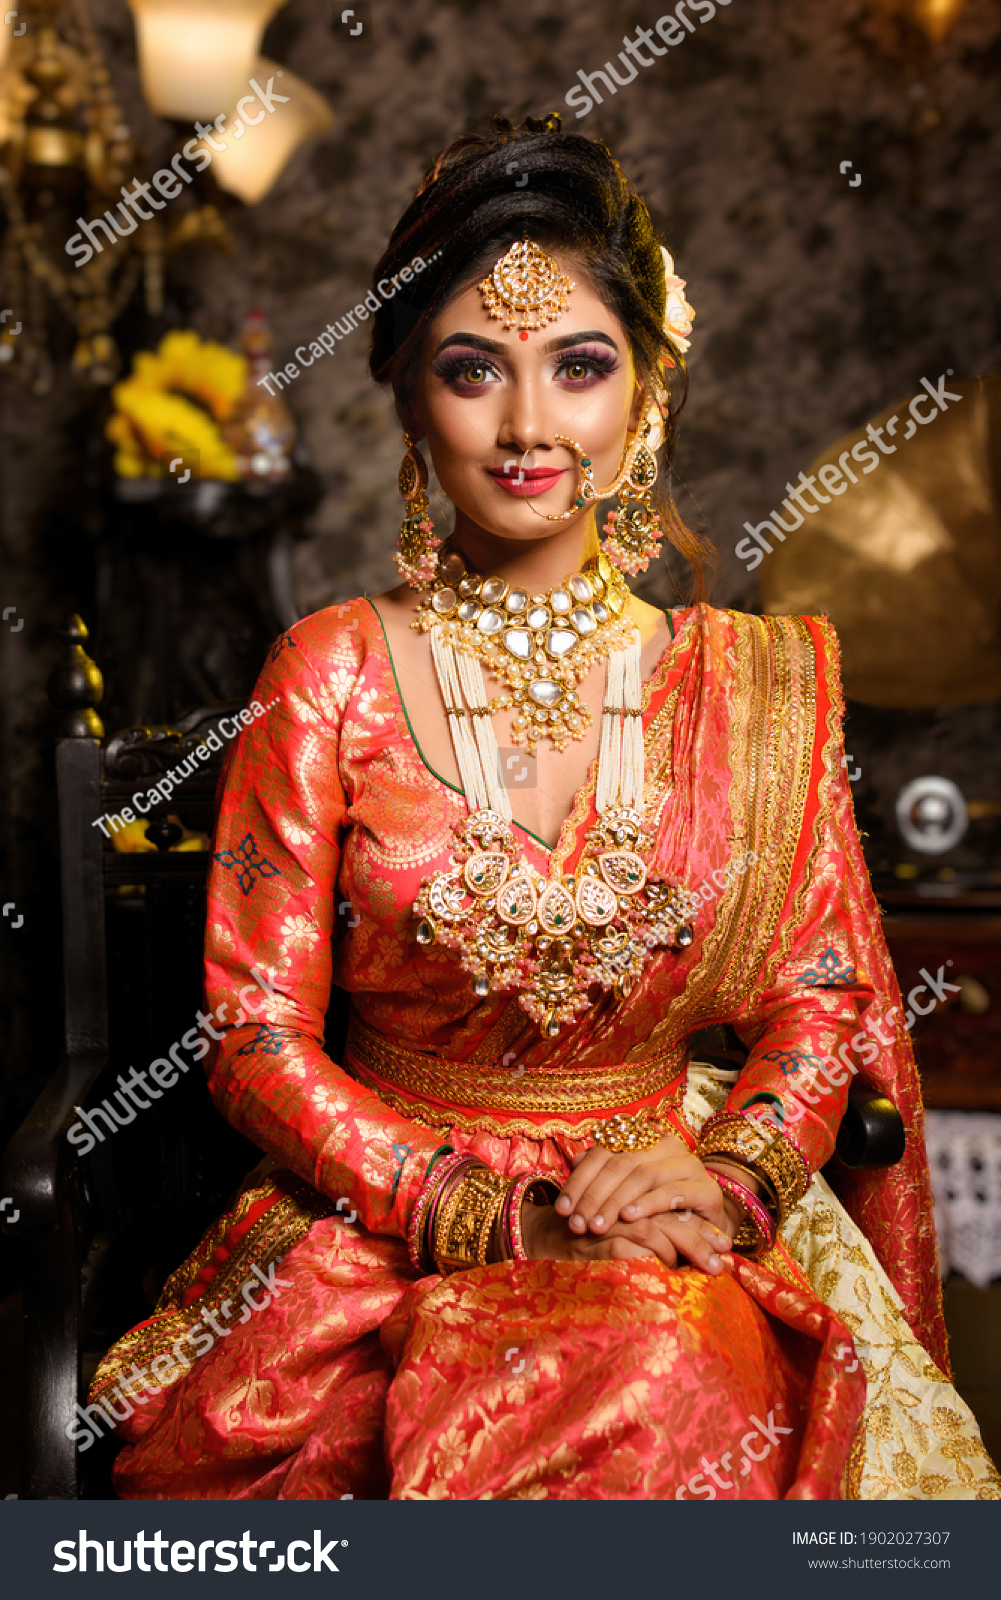 Magnificent young Indian bride in luxurious bridal costume with makeup and heavy jewellery sitting in a chair with classic vintage interior in studio lighting. Wedding fashion. #1902027307